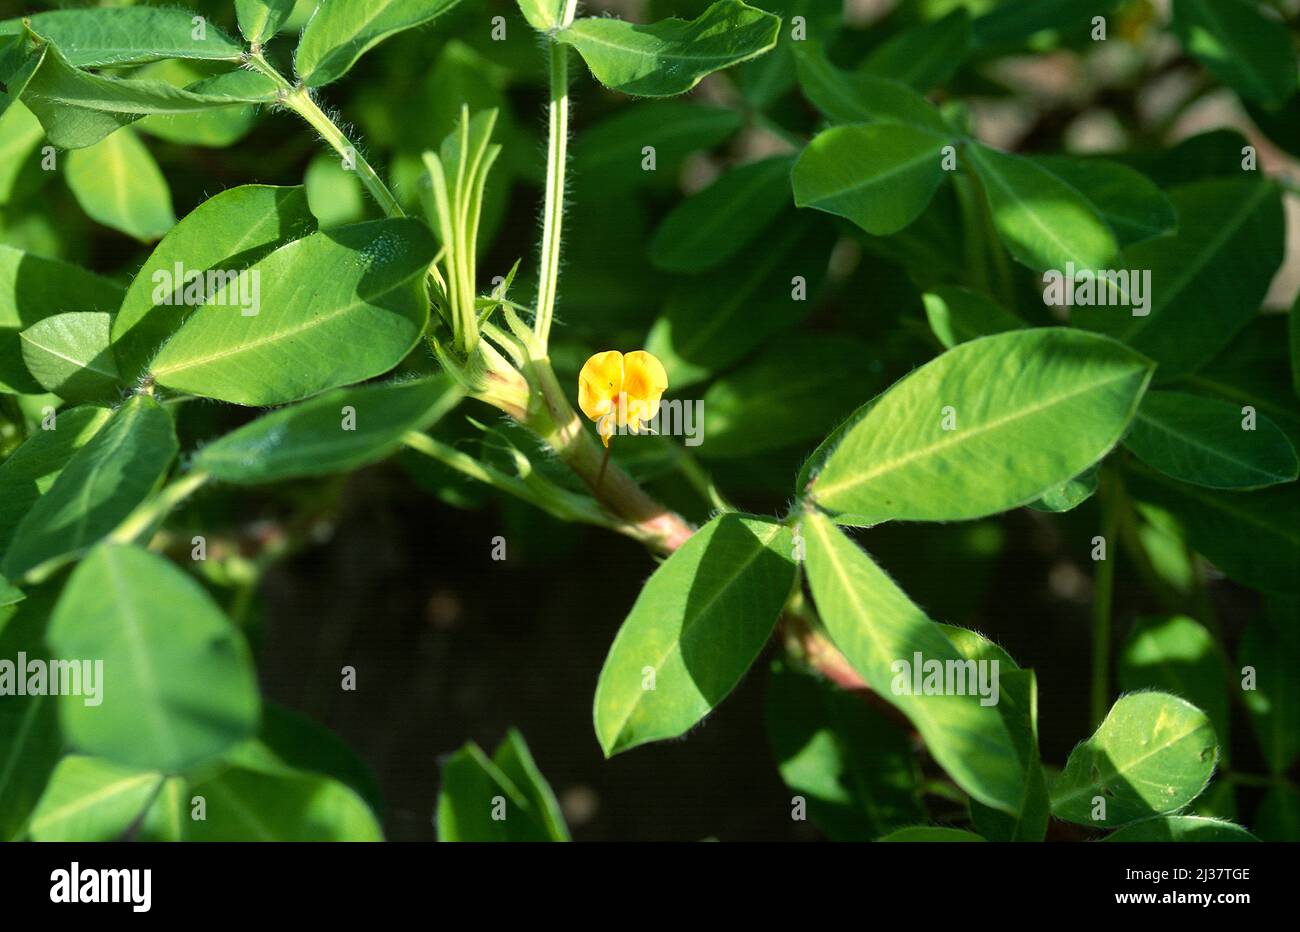 Peanut (Arachis hypogea) is an annual plant native to South America and cultivated in many other regions for its edible seeds. Flower and leaves Stock Photo